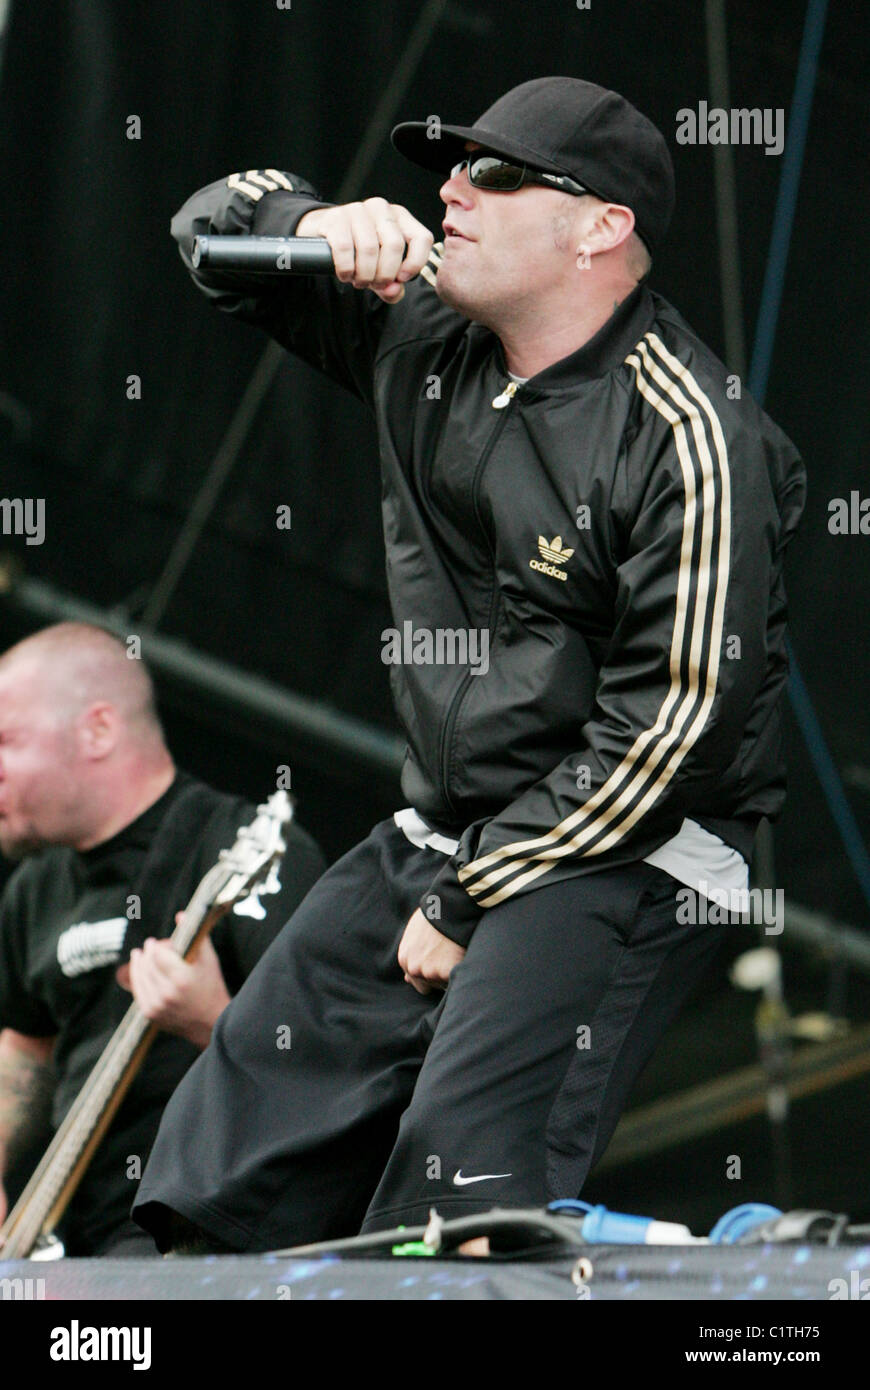 Limp Bizkit 2009 High Resolution Stock Photography and Images - Alamy